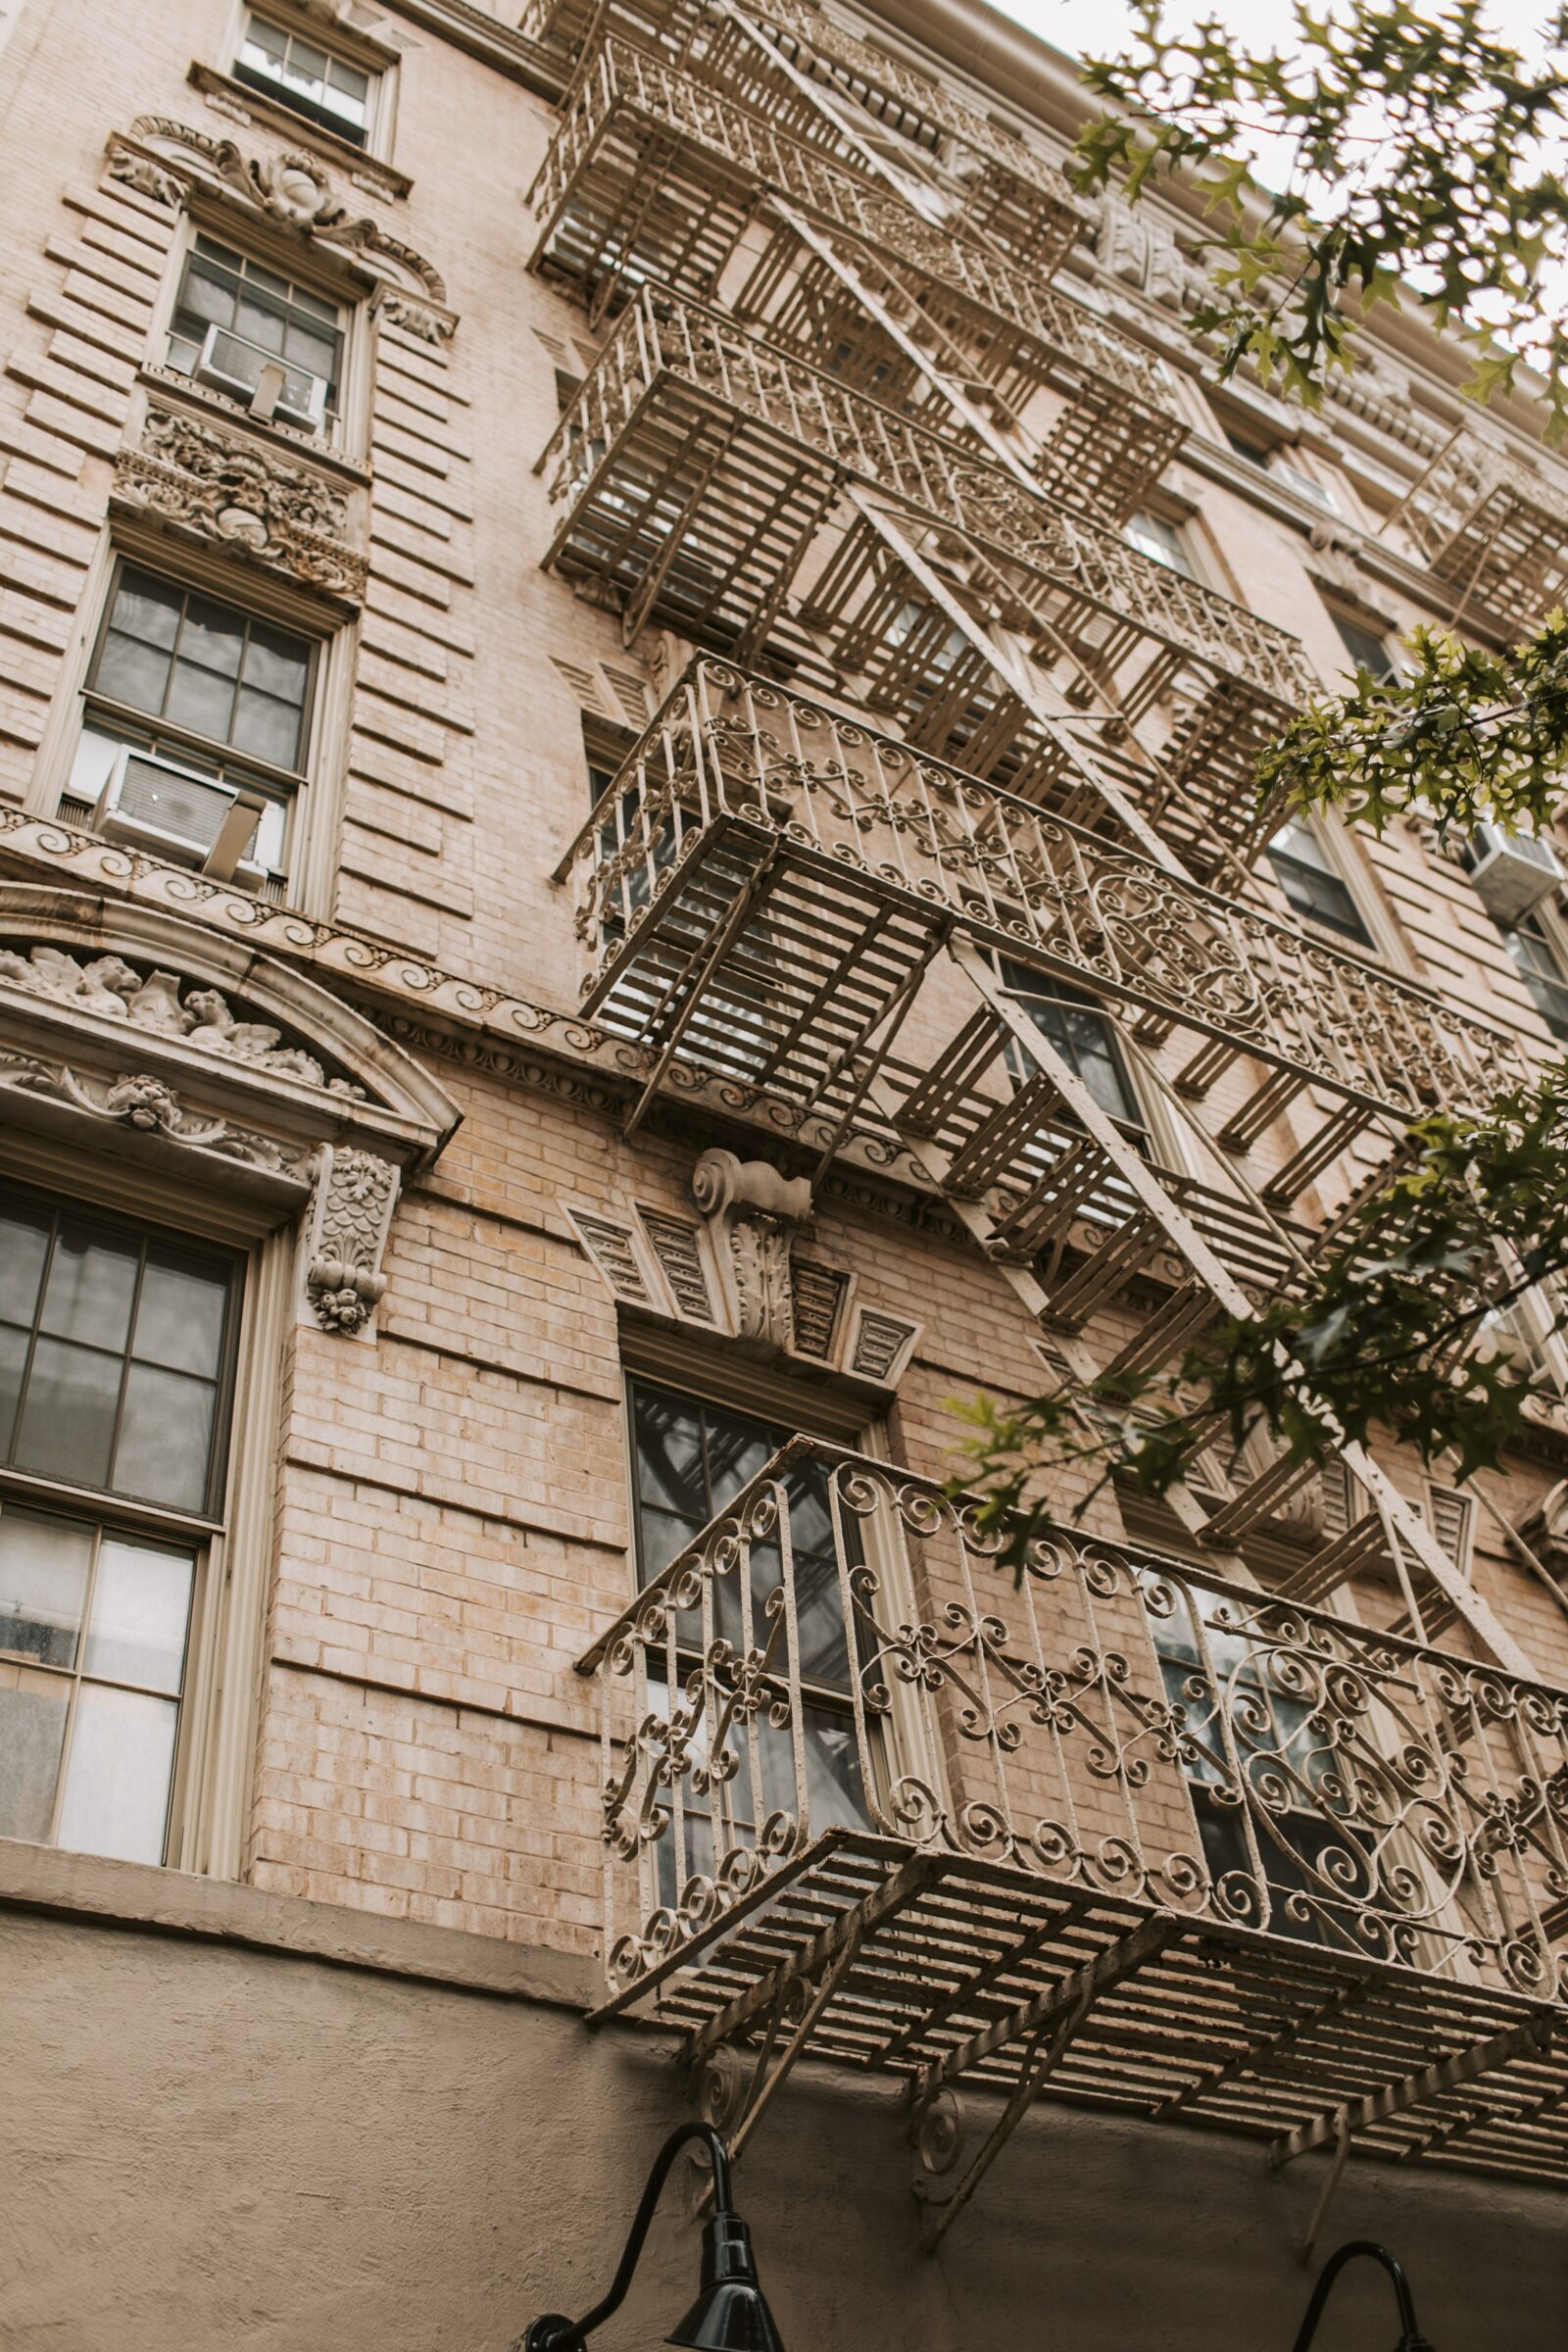 New York's Rent Prices Are Rising as Housing Supply Decreases